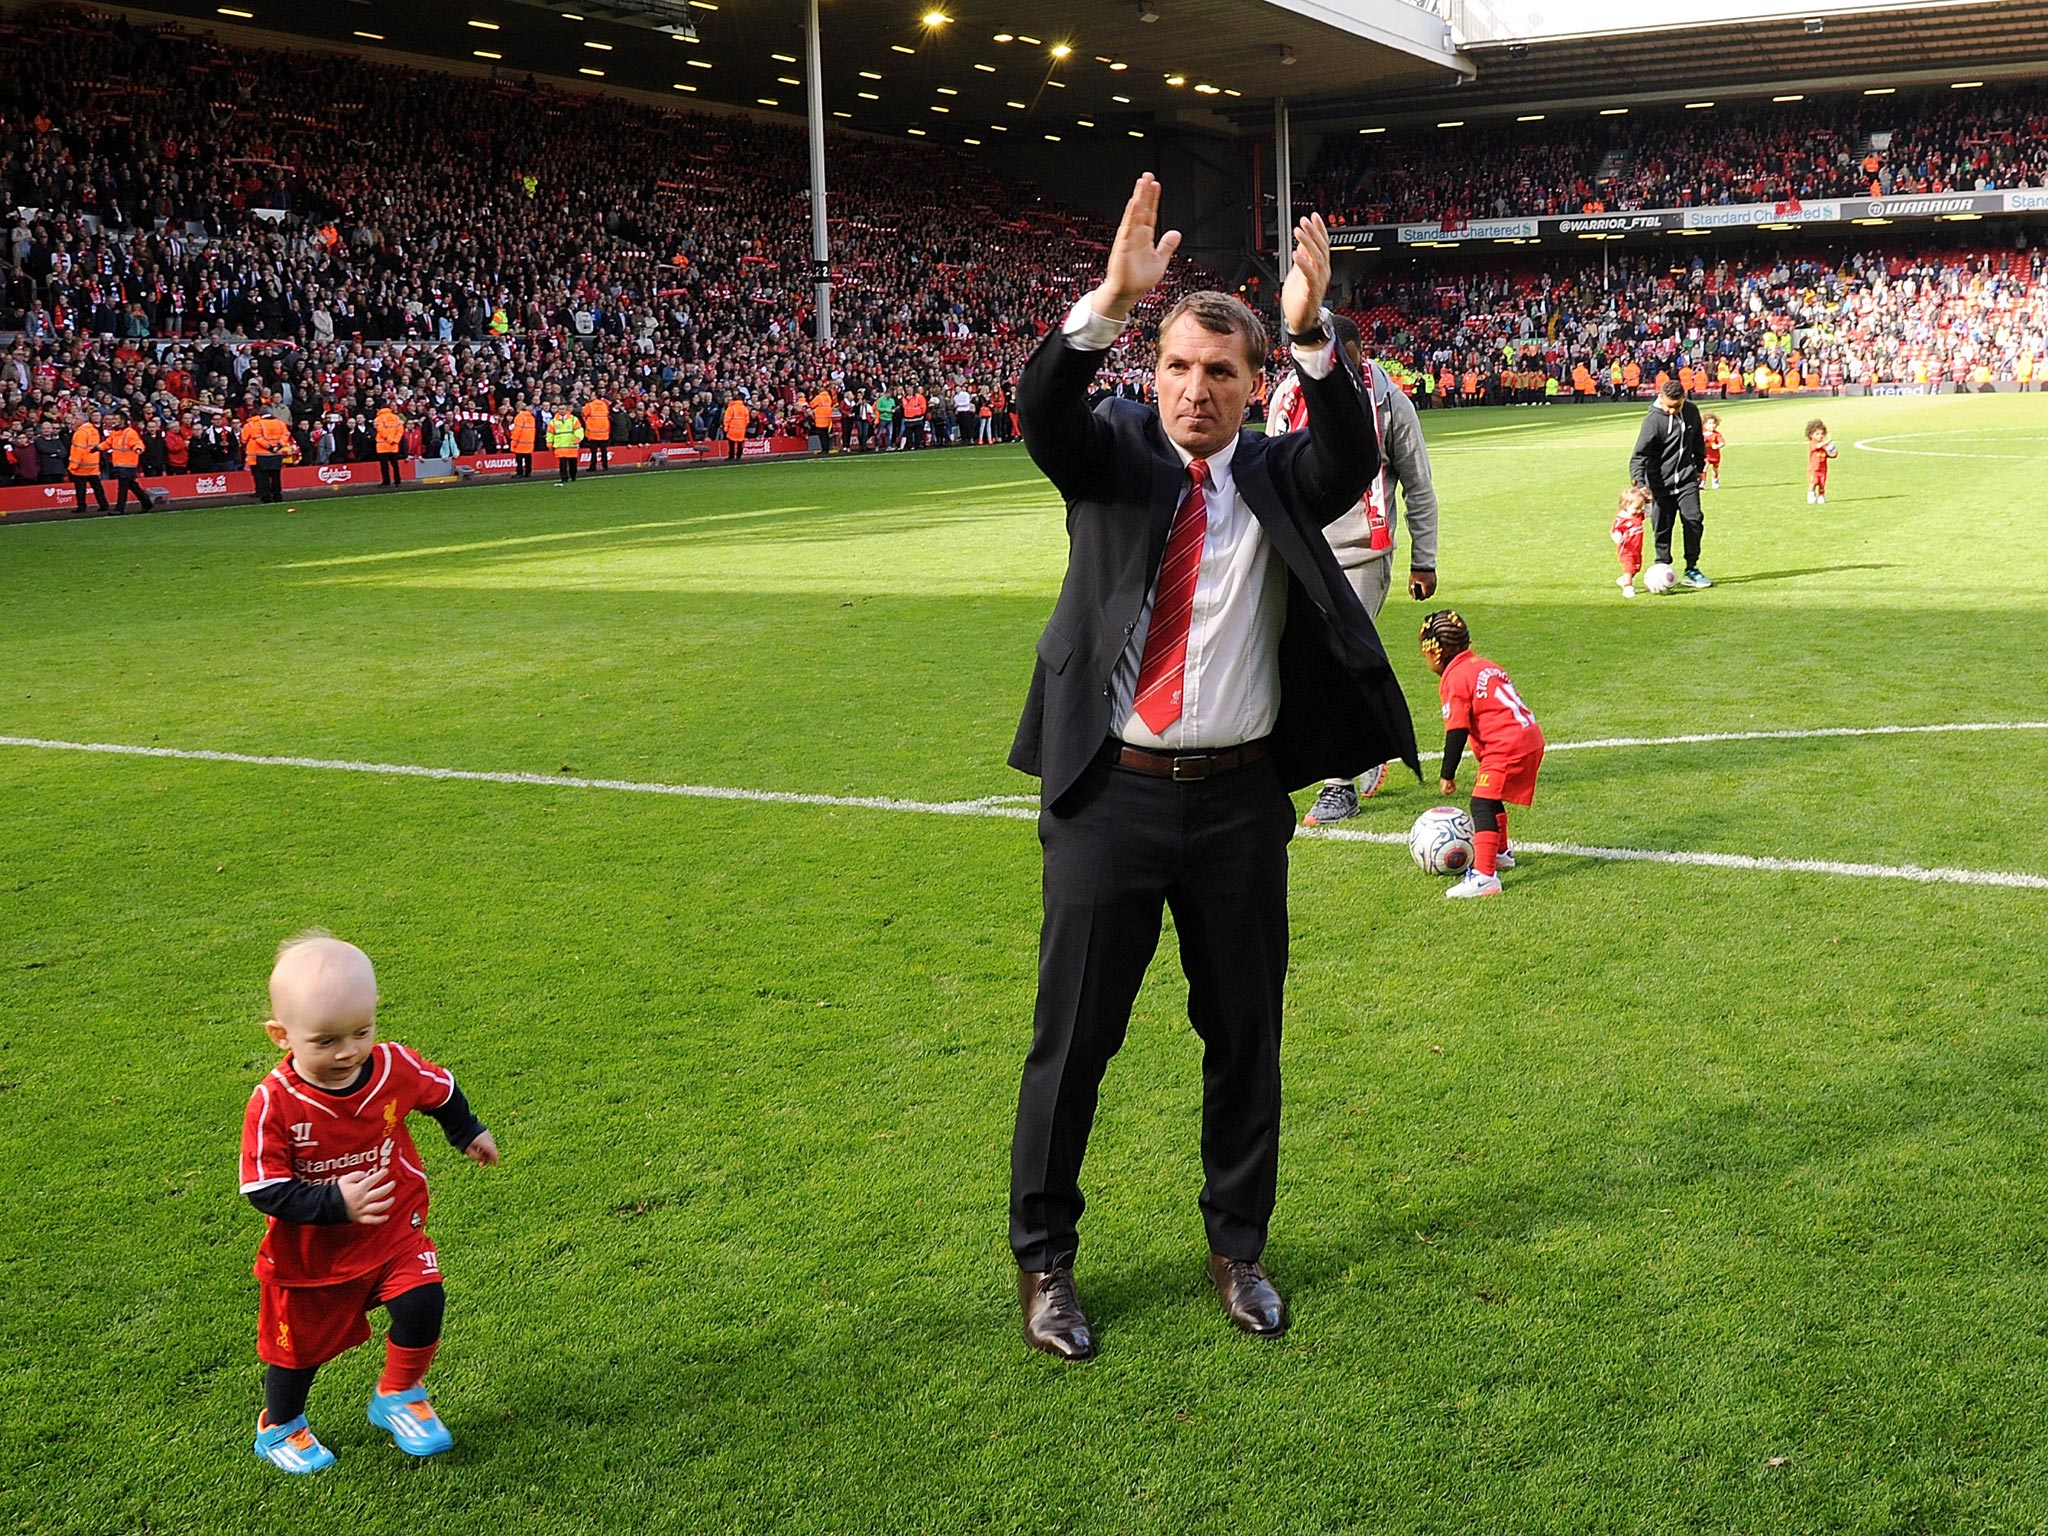 Brendan Rodgers applauds the Liverpool fans for their support this season after the 2-1 win over Newcastle